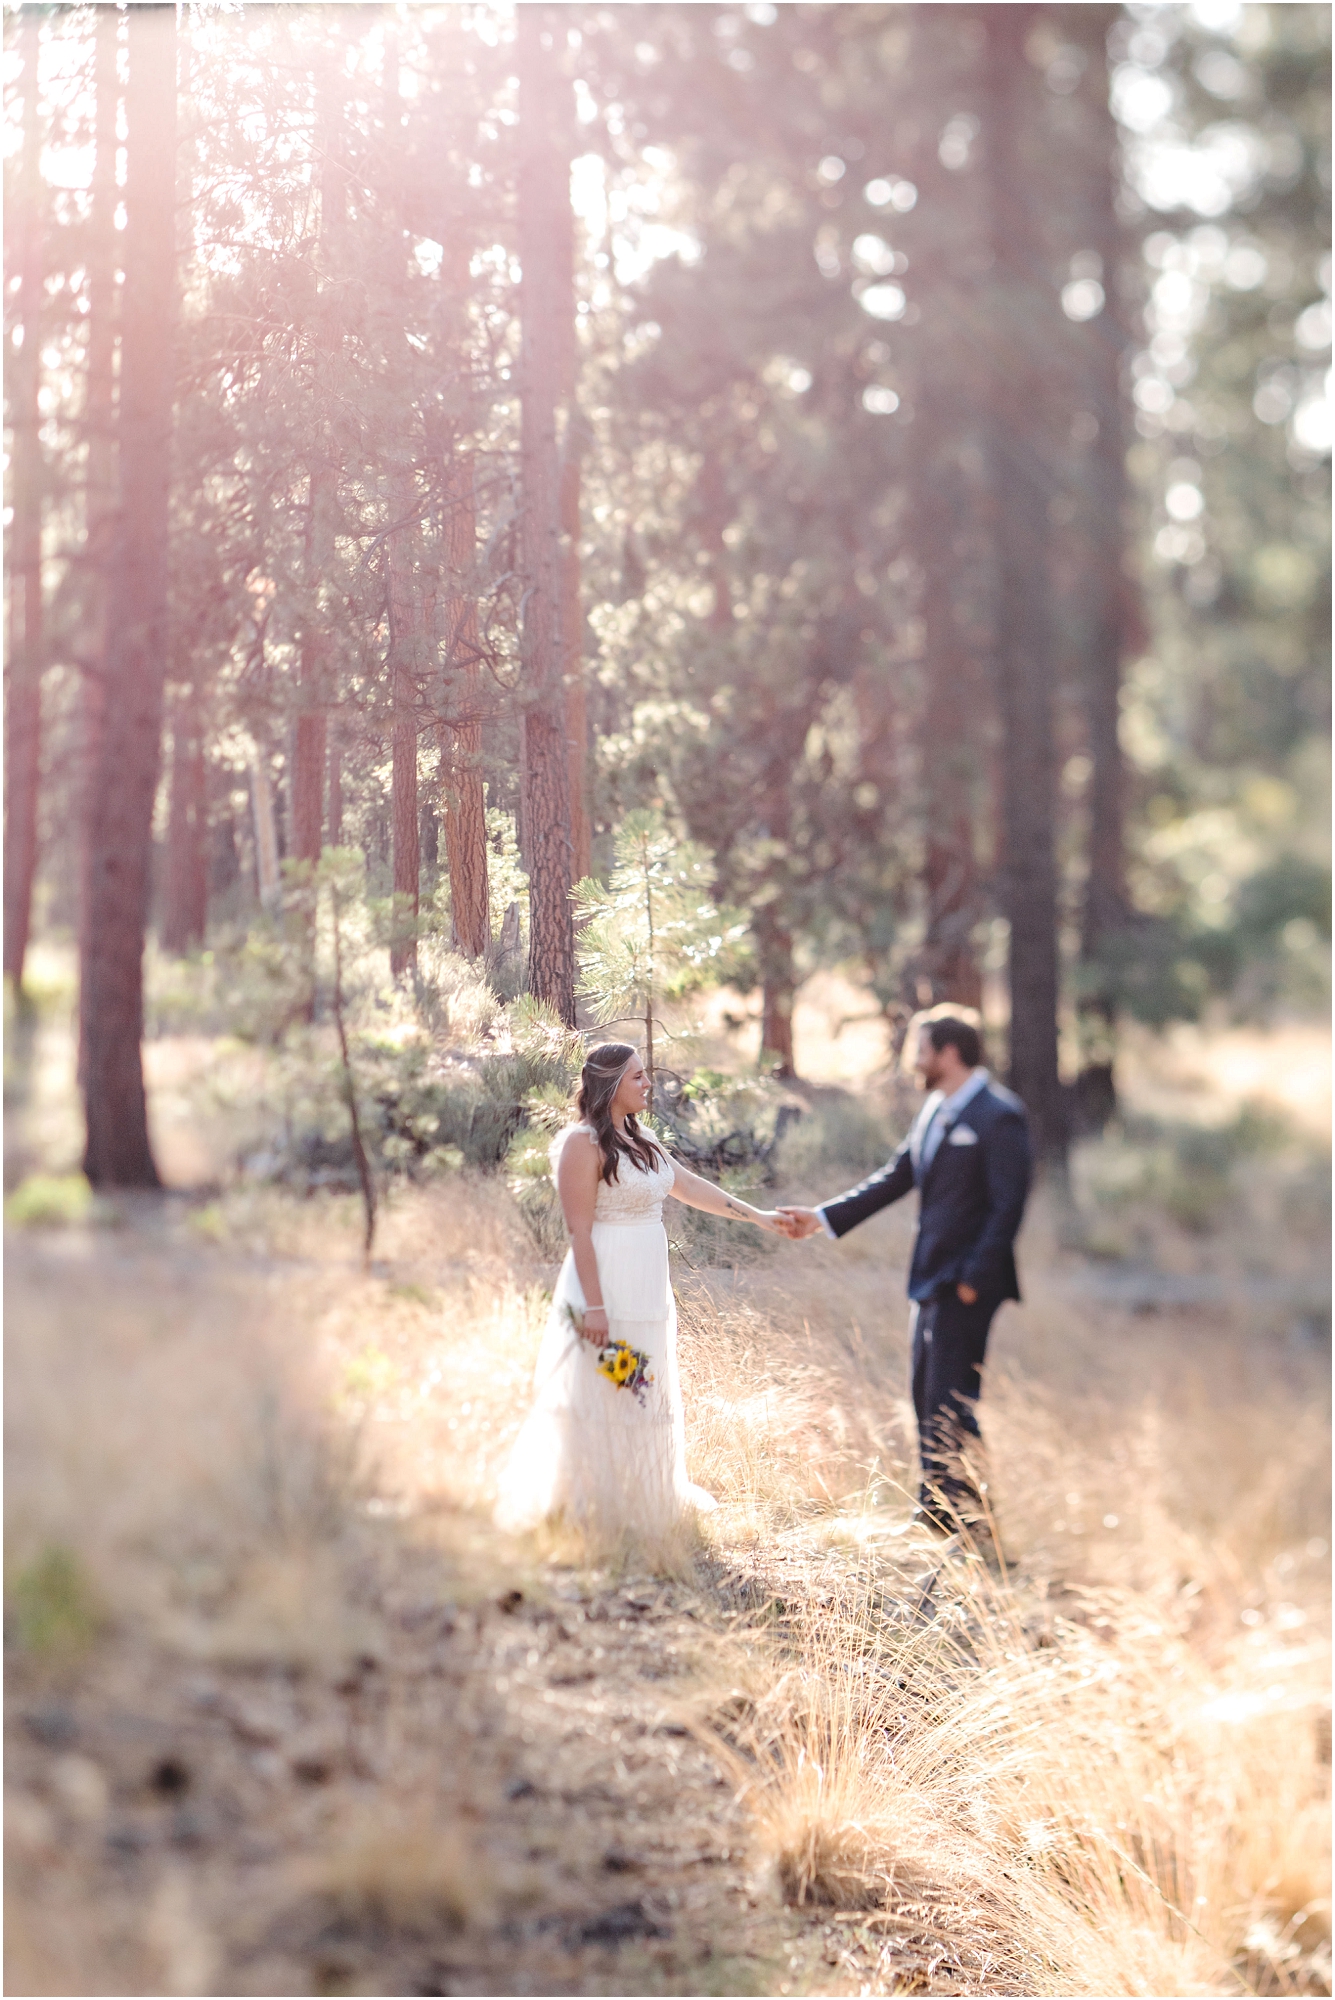 A dreamy artistic wedding photo of the couple standing in the pine forest near the Deschutes River after their Bend Oregon elopement. | Erica Swantek Photography